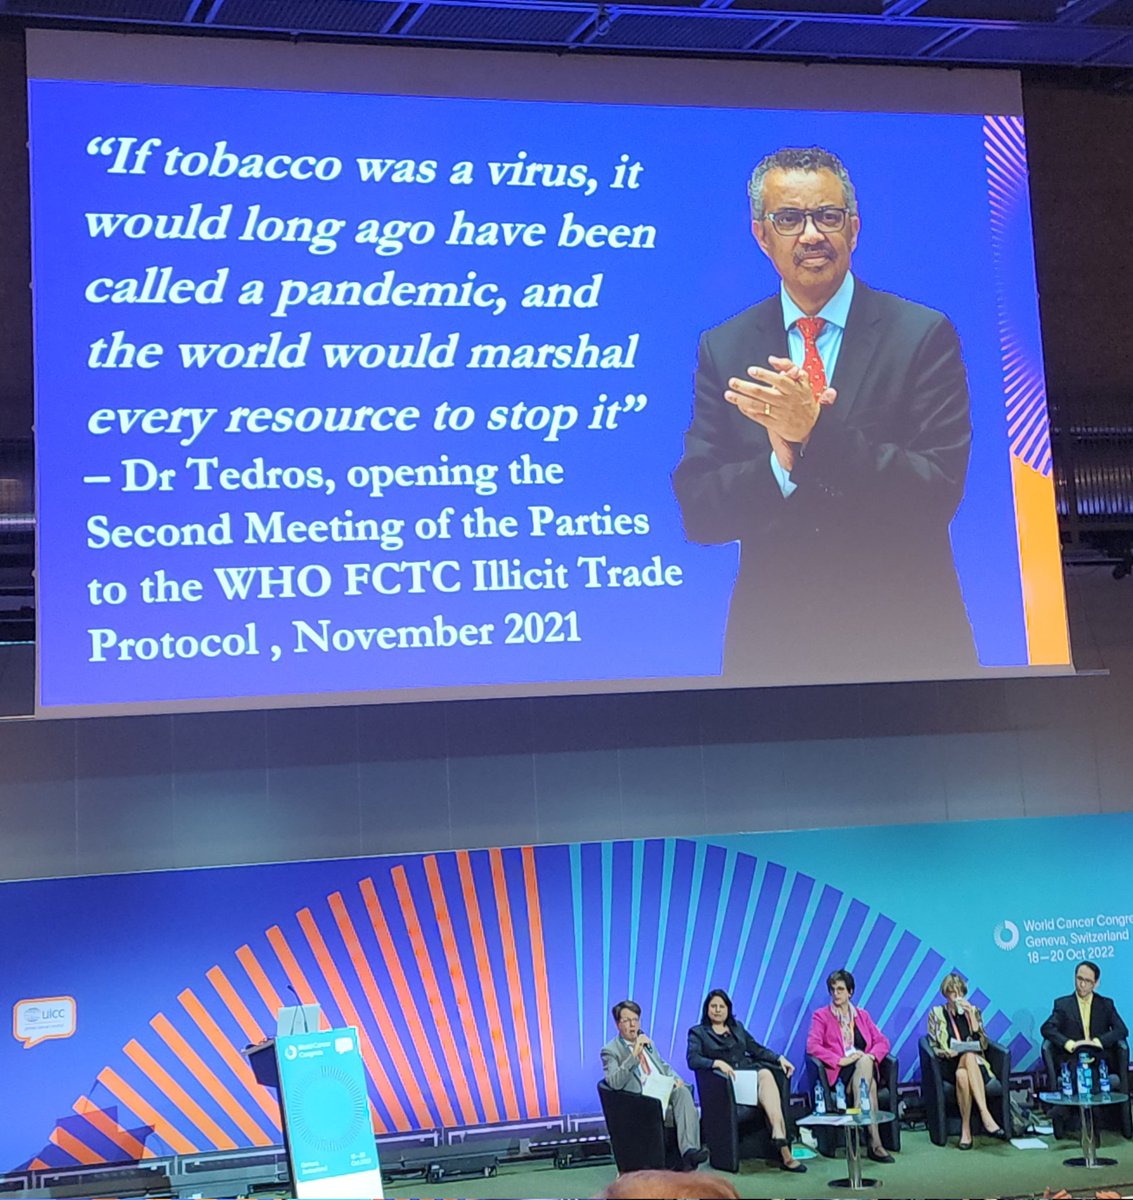 Tobacco kills 8 million people every year. Stagger ing needless loss of lives. @uicc #wcc2022 #worldcancercongress